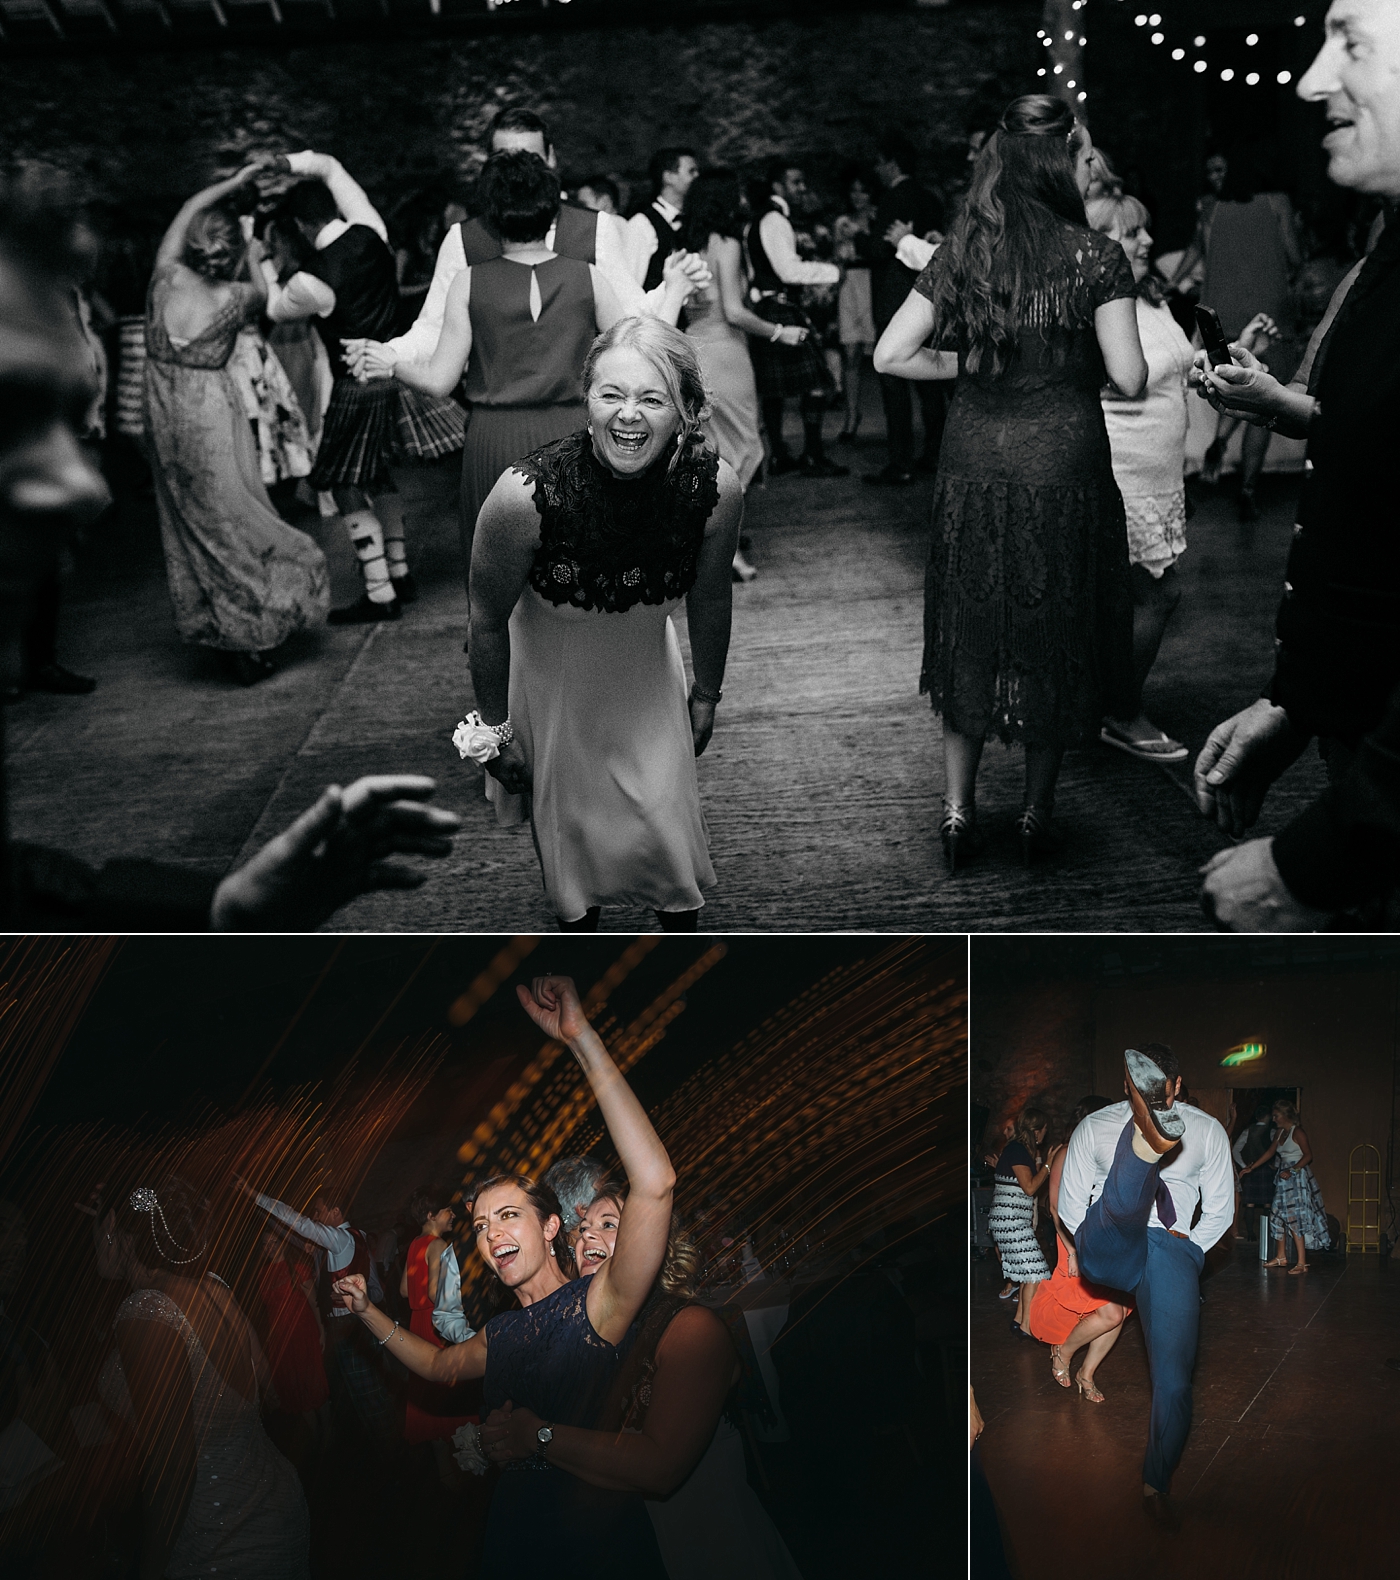 planning your wedding party timeline - crazy dancing at Kinkell byre